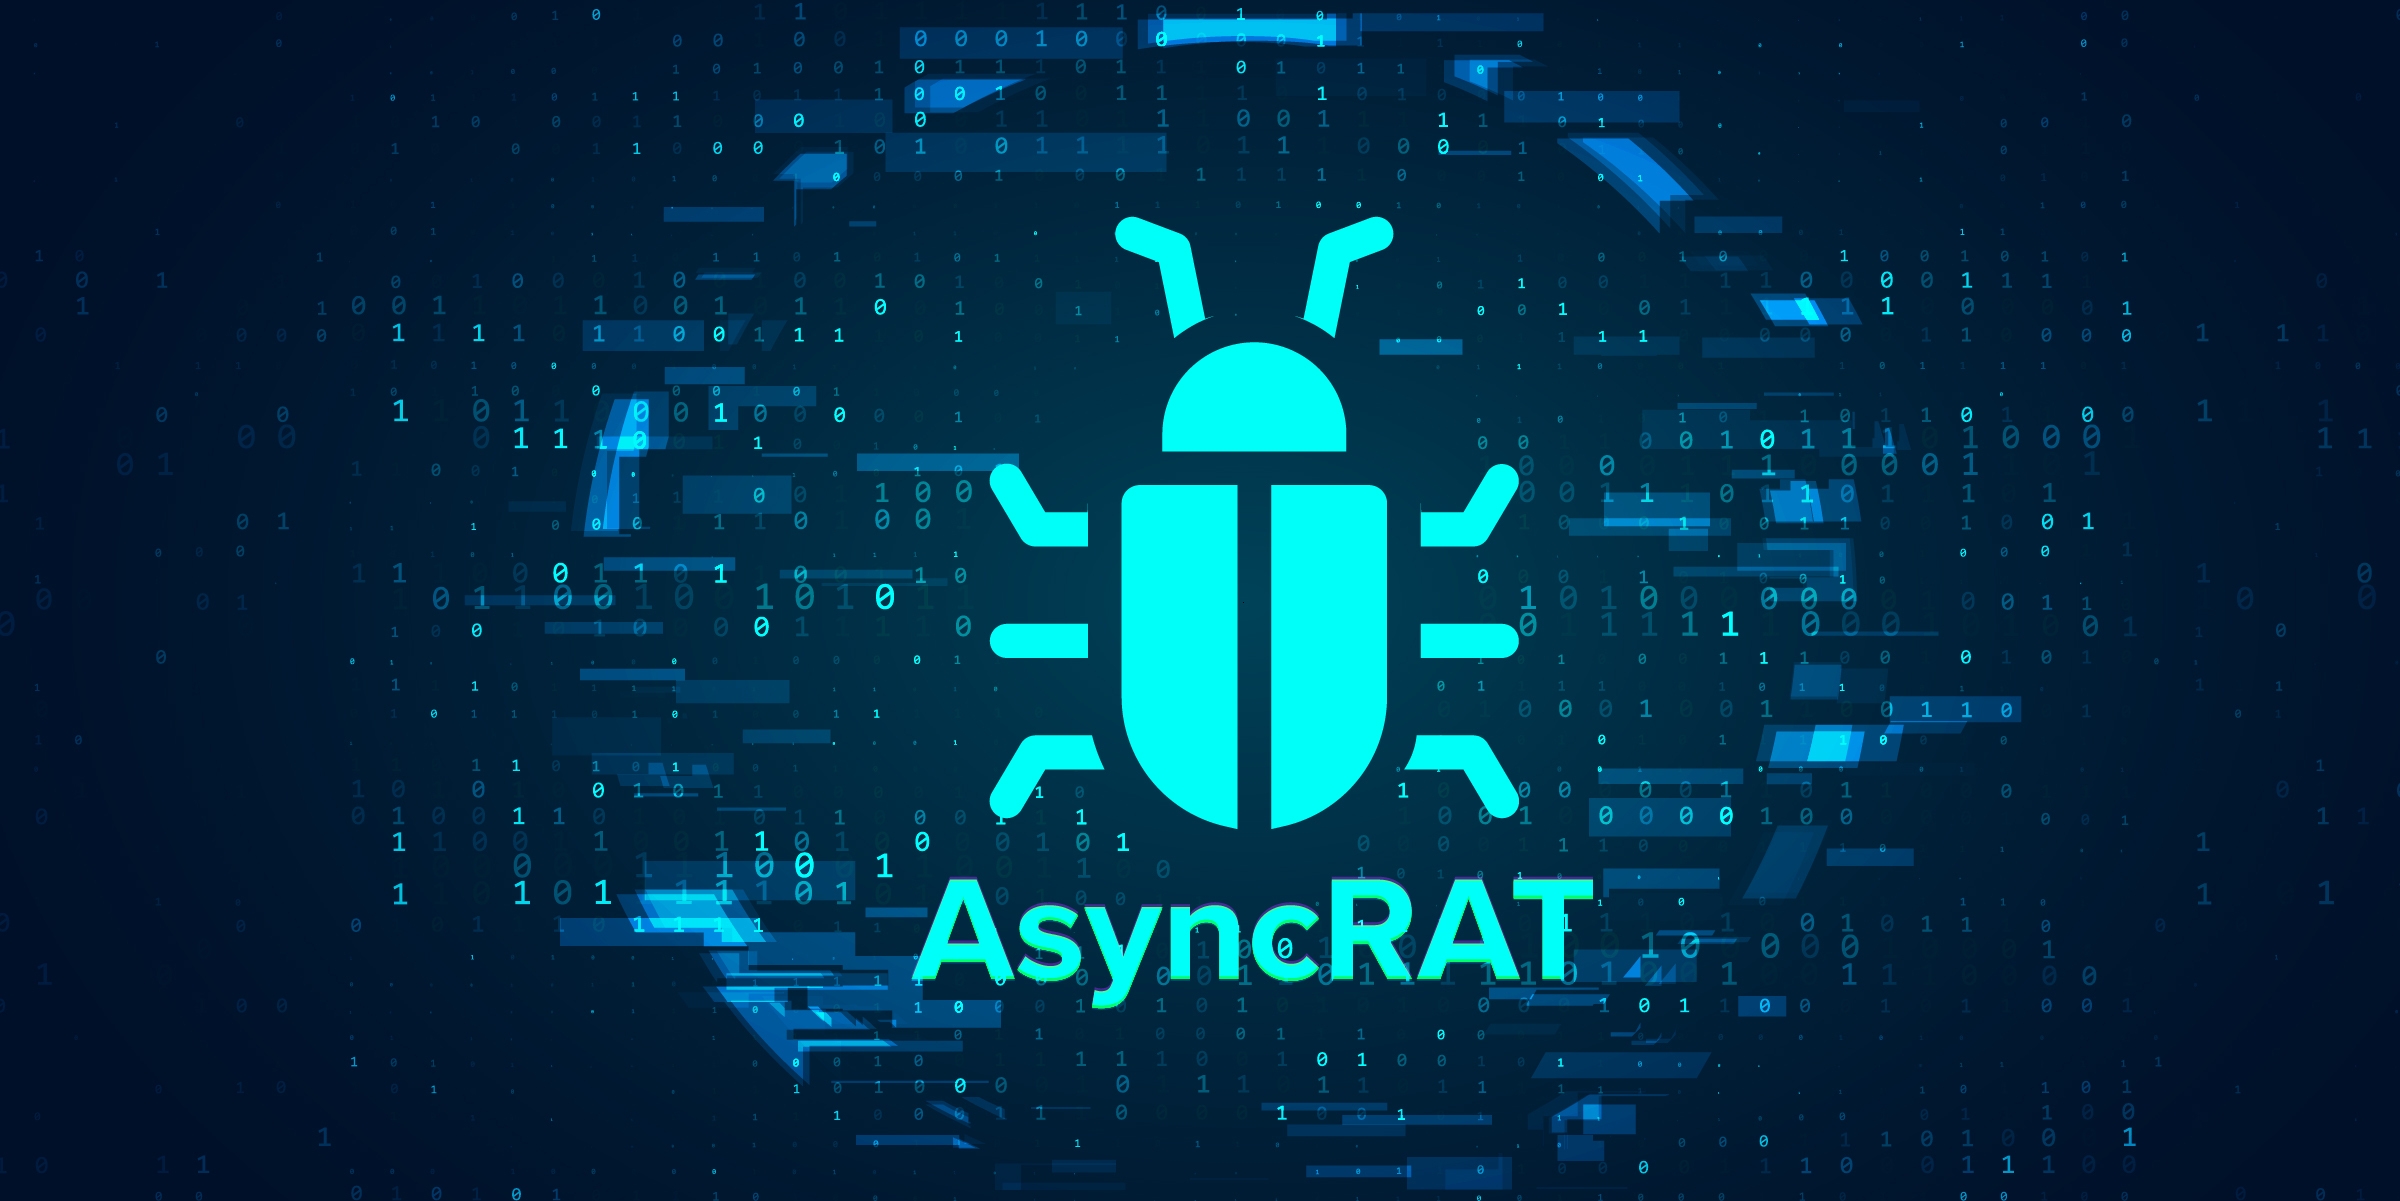 AsyncRAT: The Anatomy of a Highly-Evasive Malware